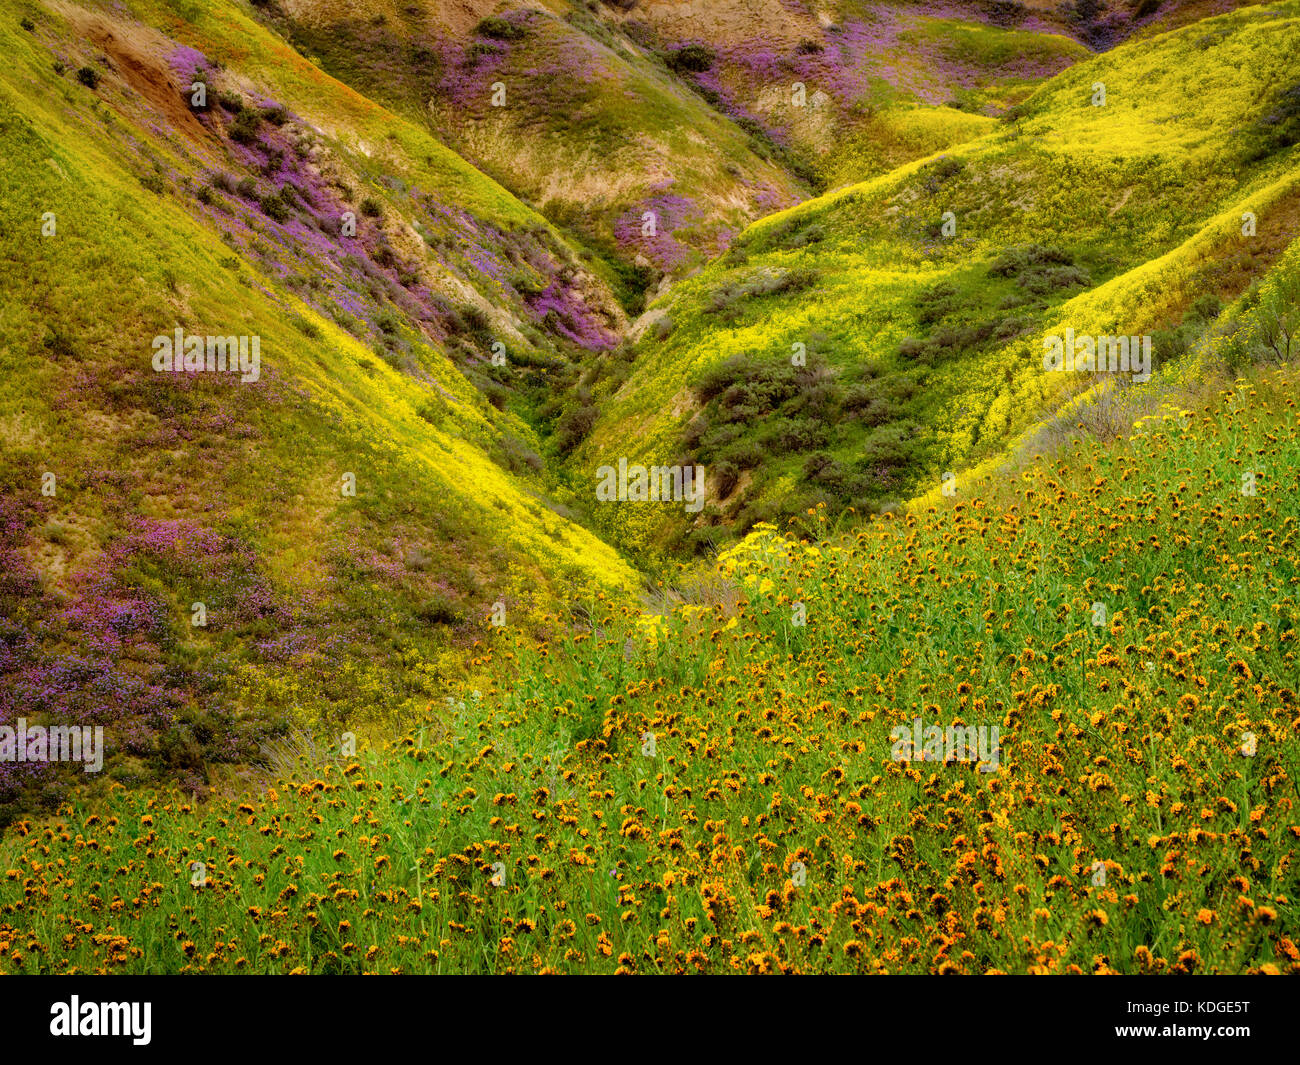 Foreground of Devil’s Lettuce or Fiddleneck (Amsinckia tessellata) with flower covered hills. Carrizo Plain National Monument, California Stock Photo